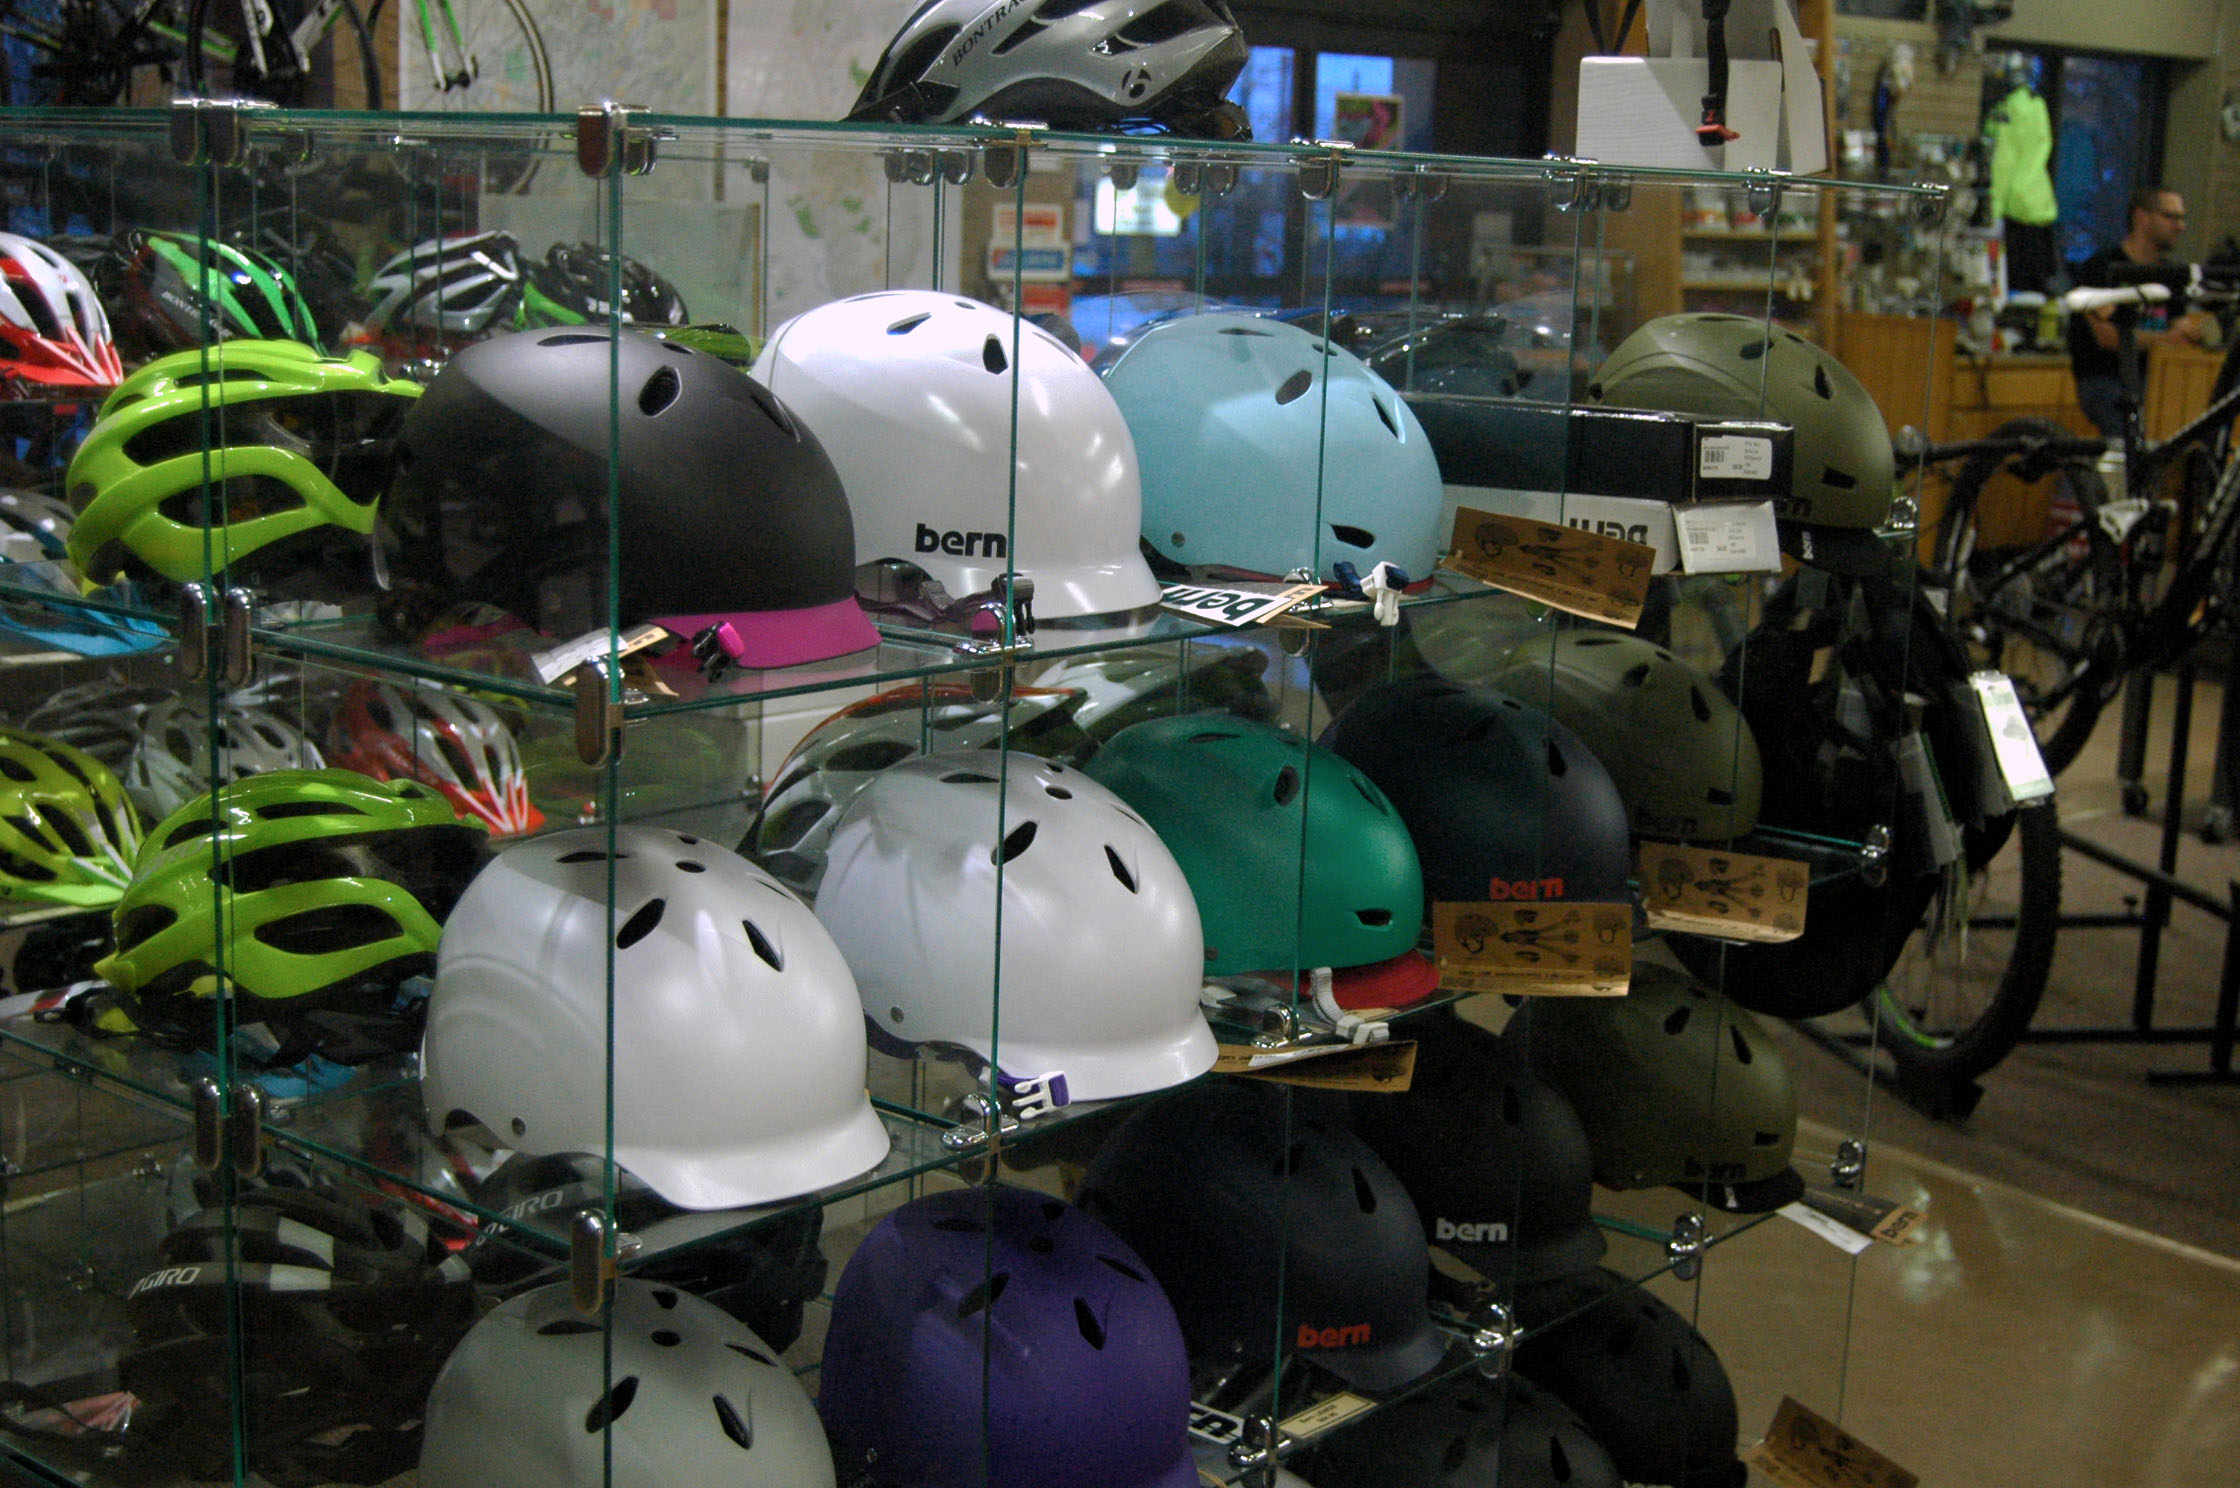 helmets hanging in a display in a shop